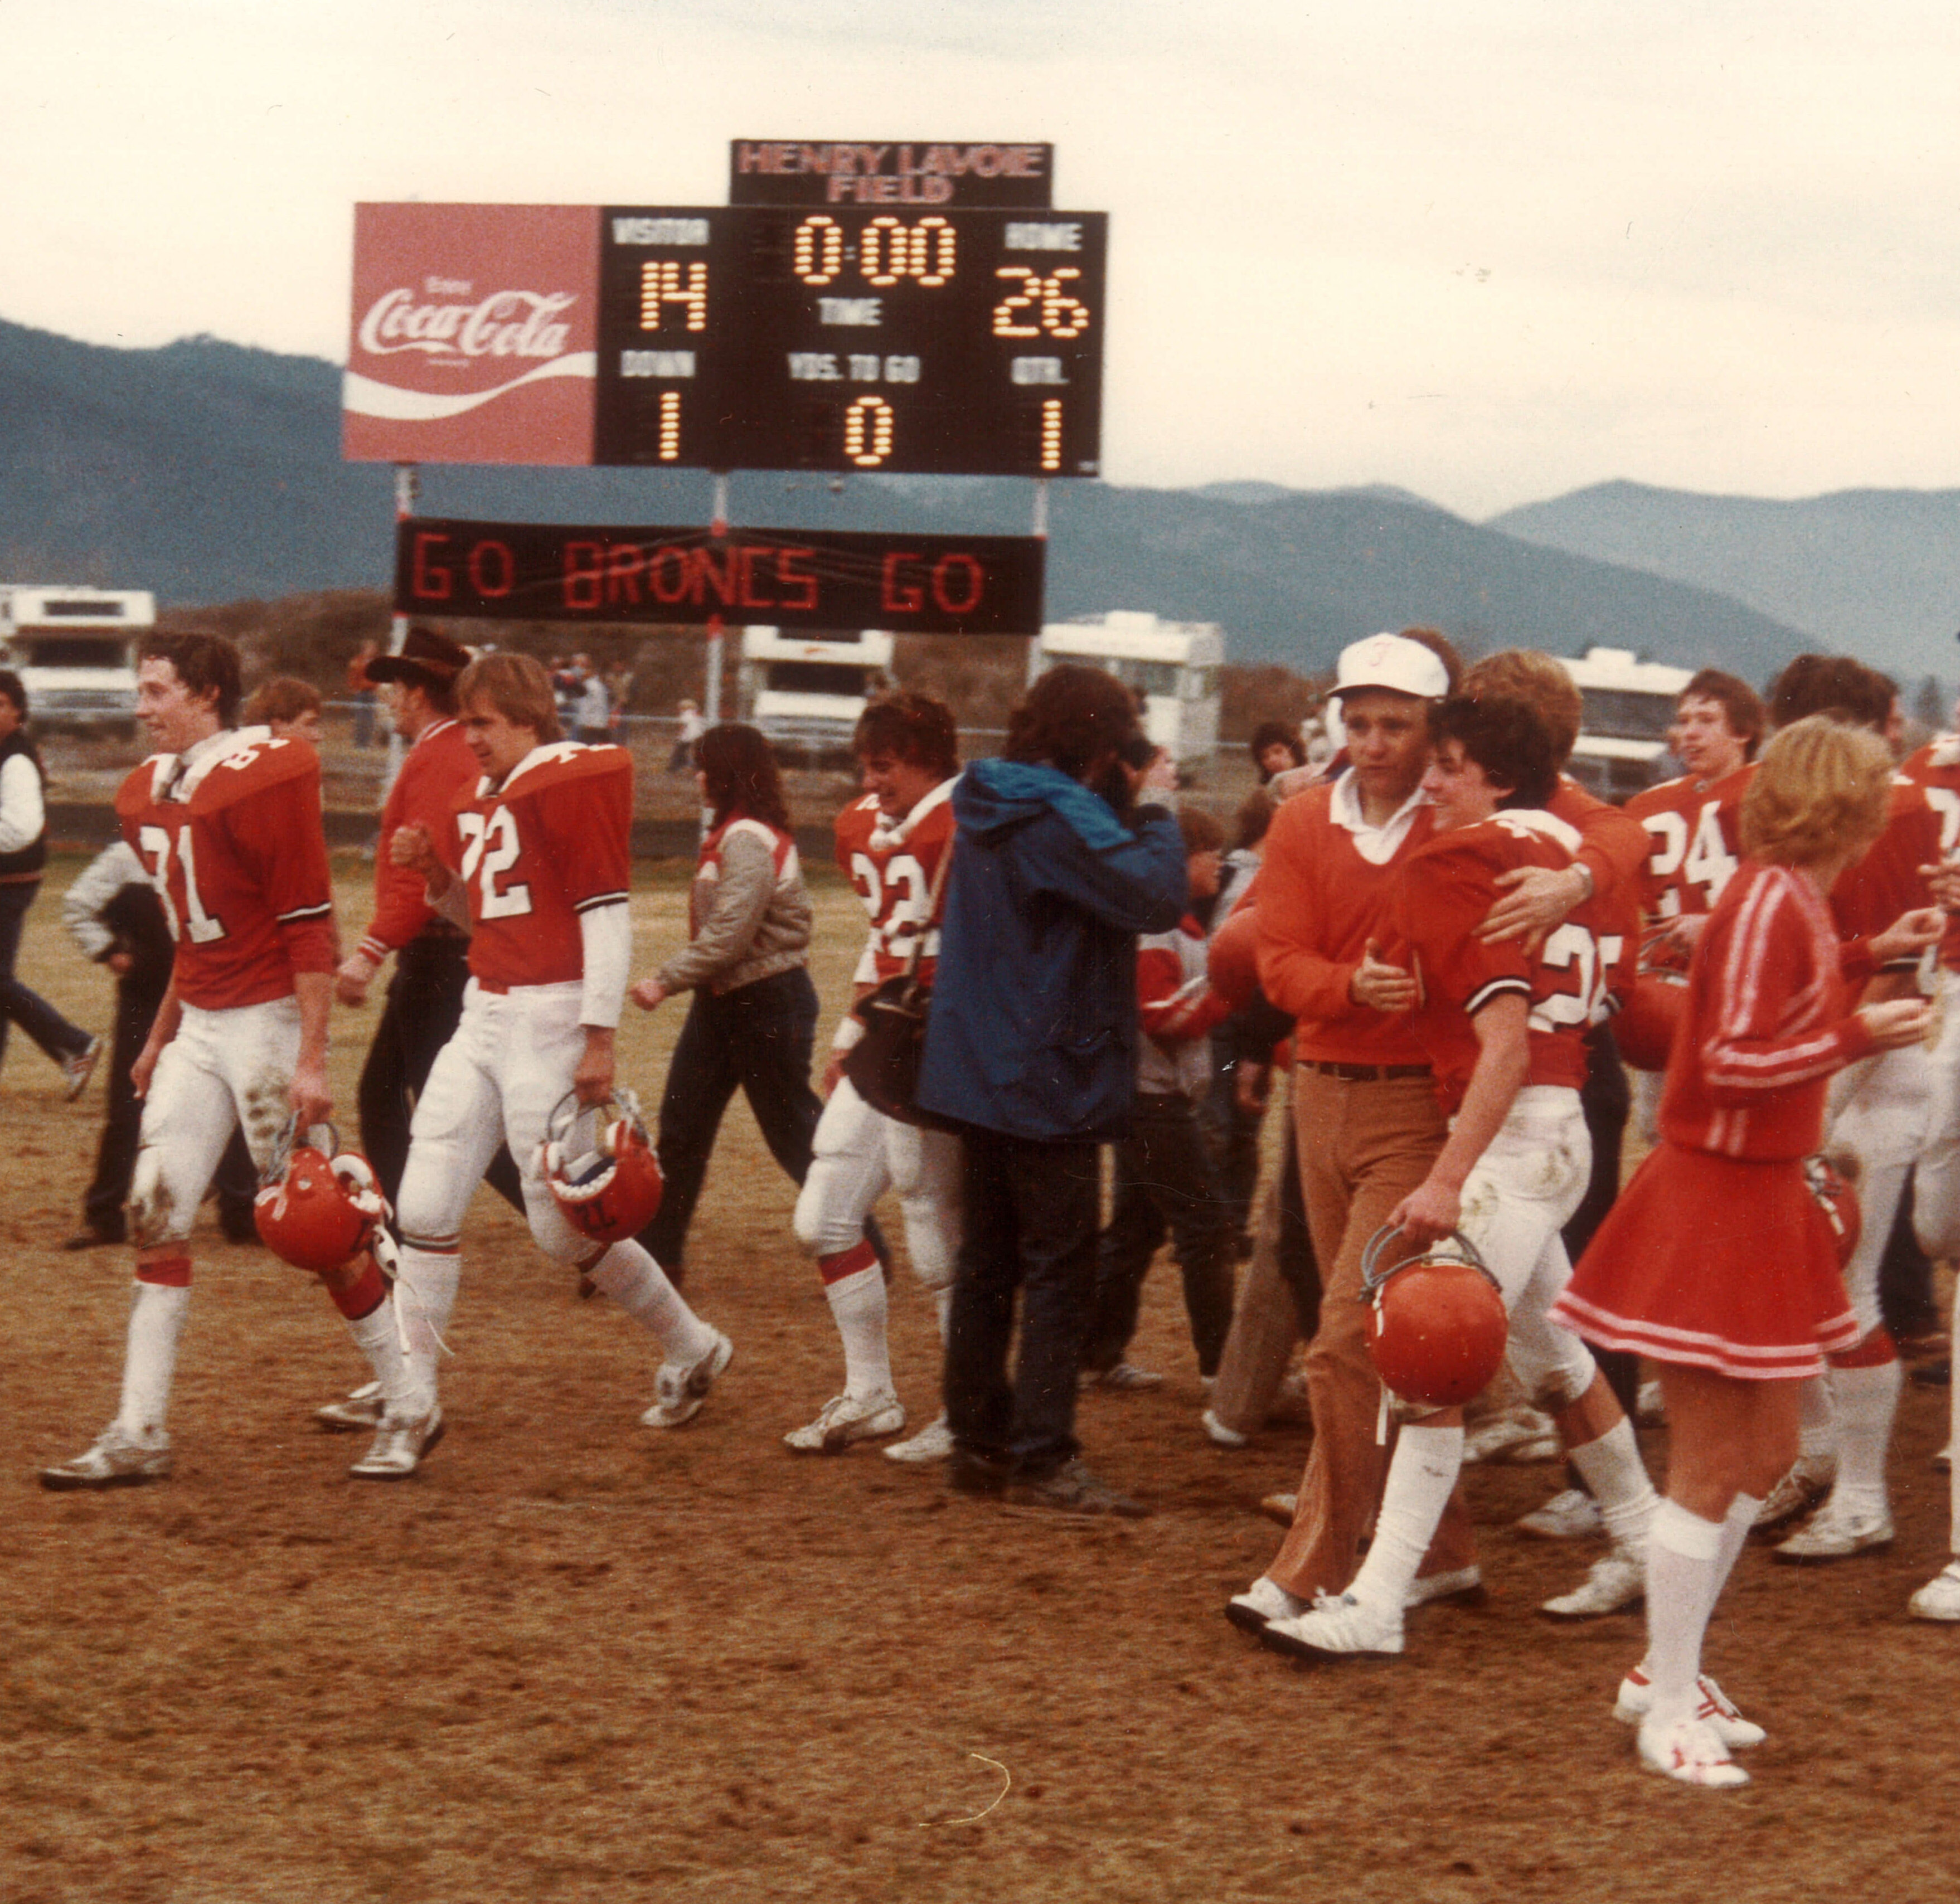 Coach Rick Unruh with the Broncs after the '83 State Championship game.